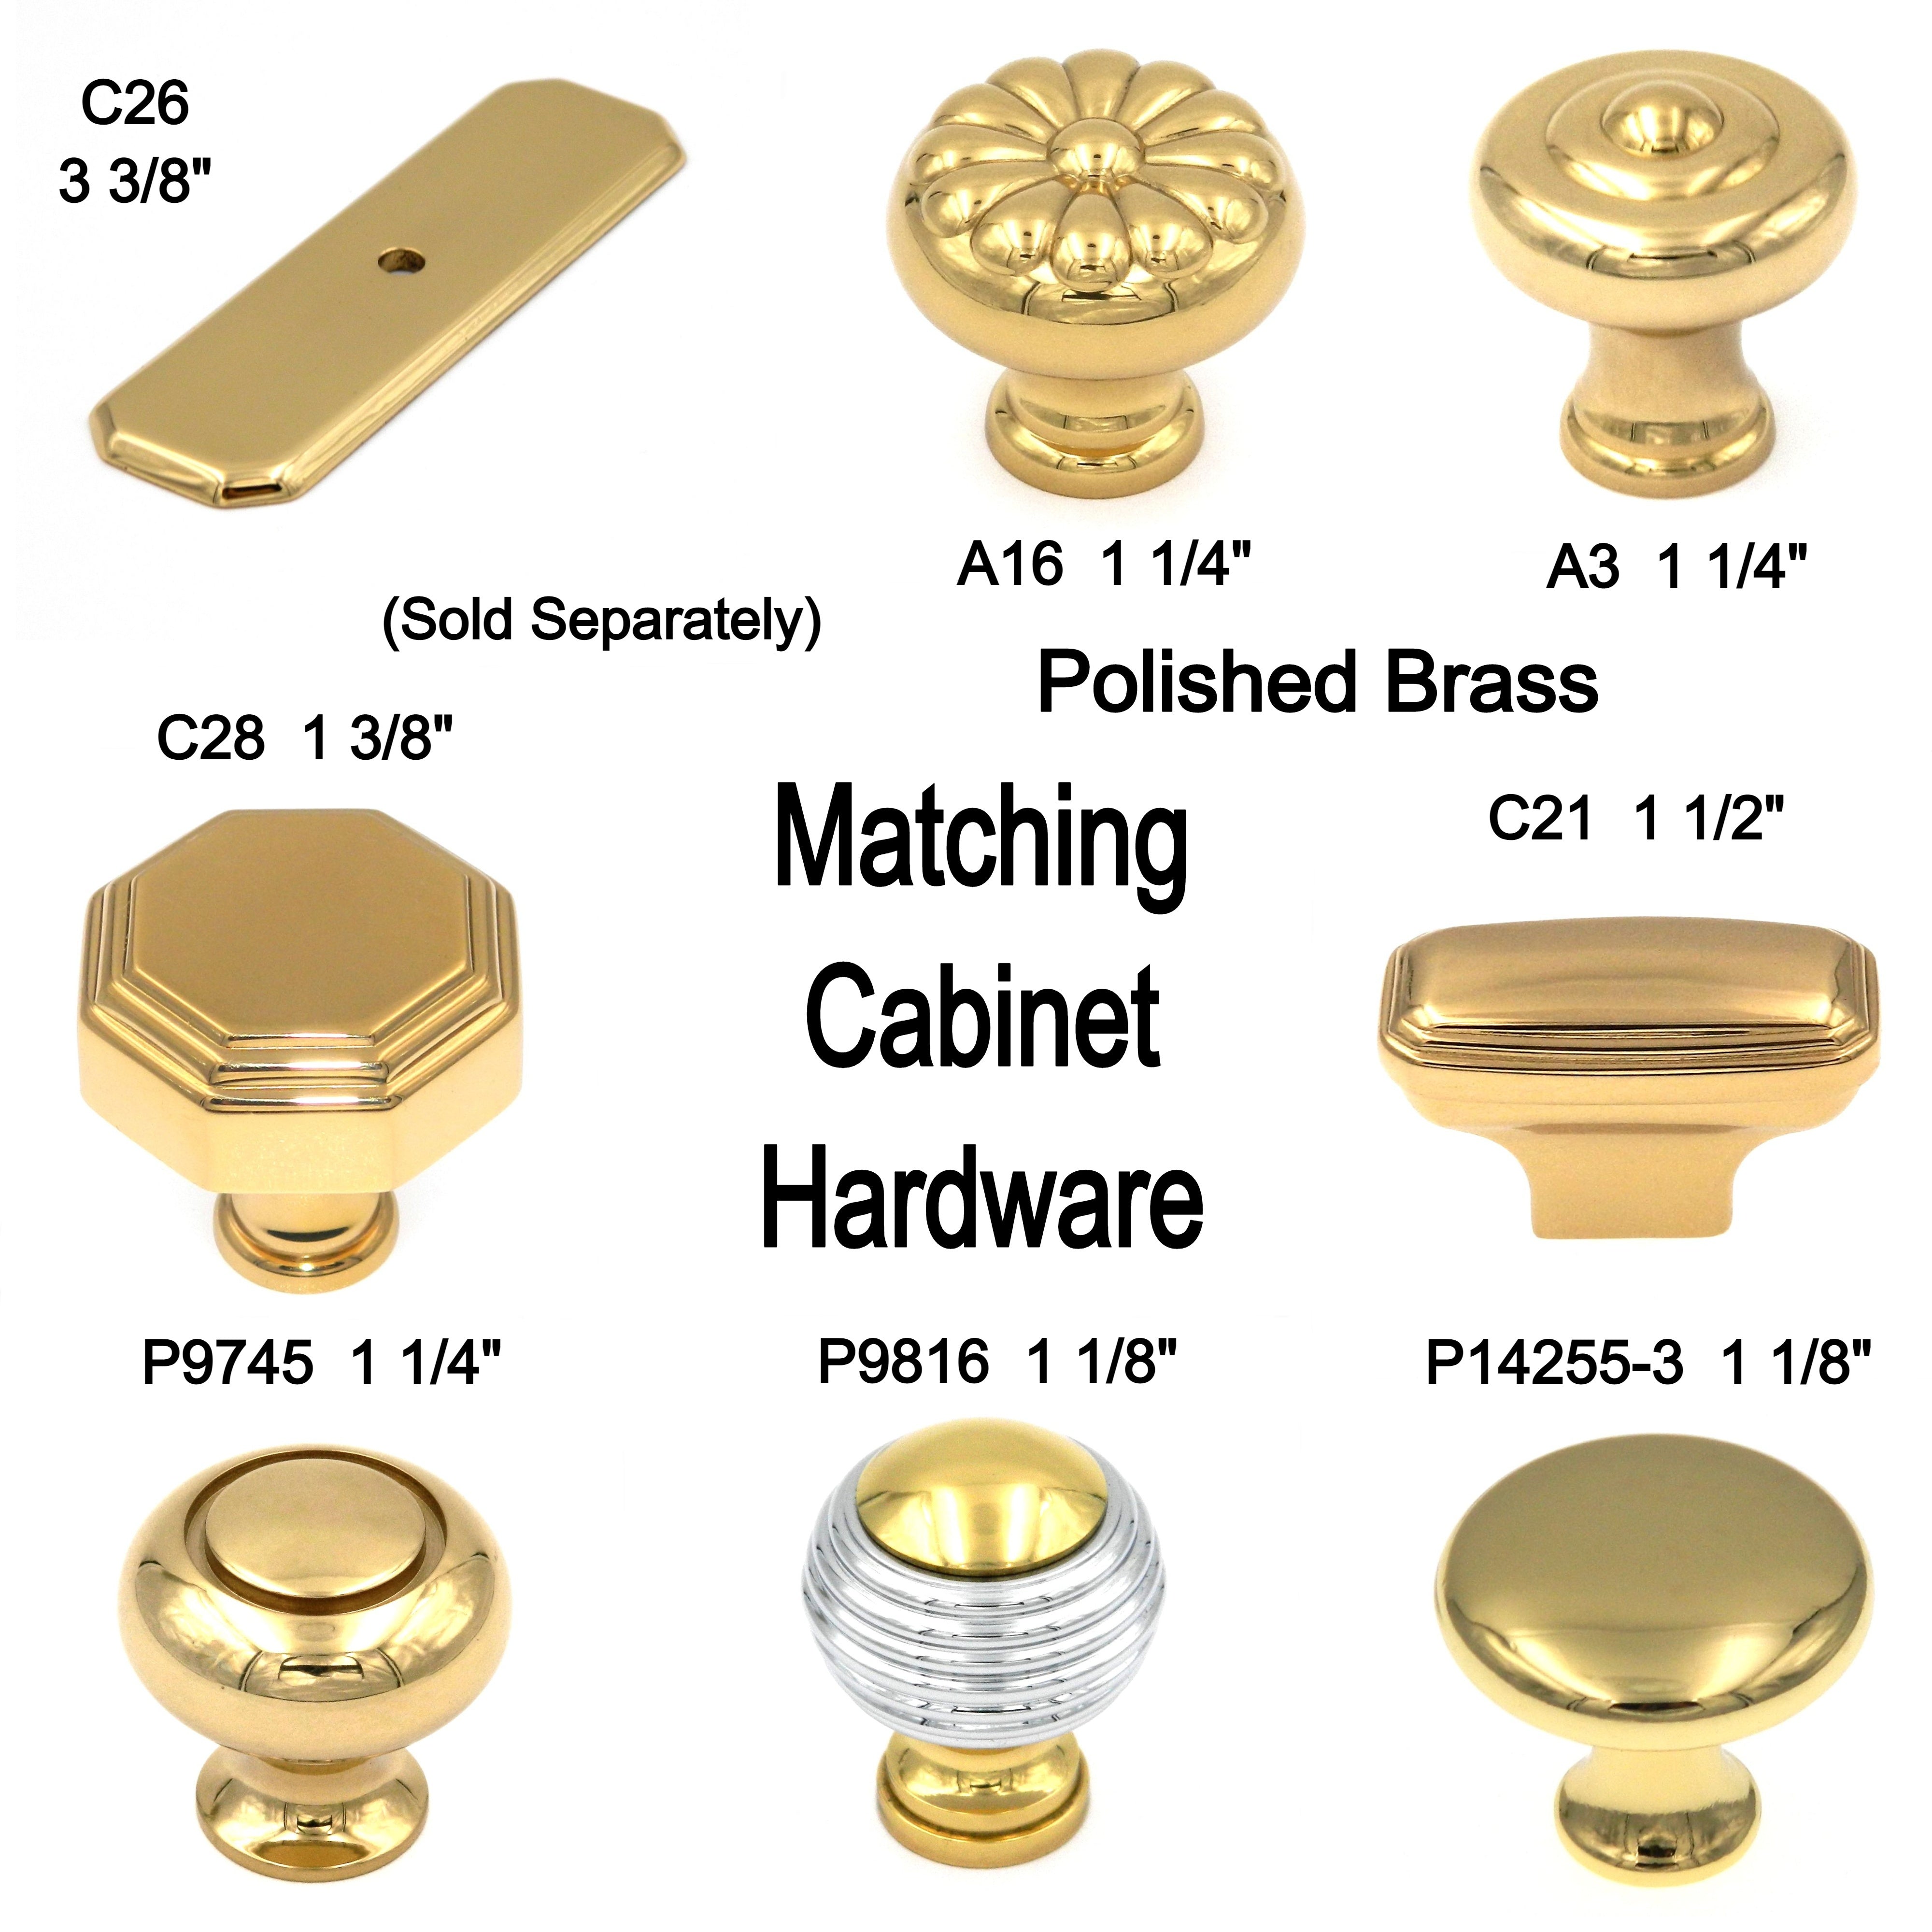 20 Pack Belwith Keeler Sechel 1 1/4" Polished Brass Round Solid Brass Cabinet Knob A3